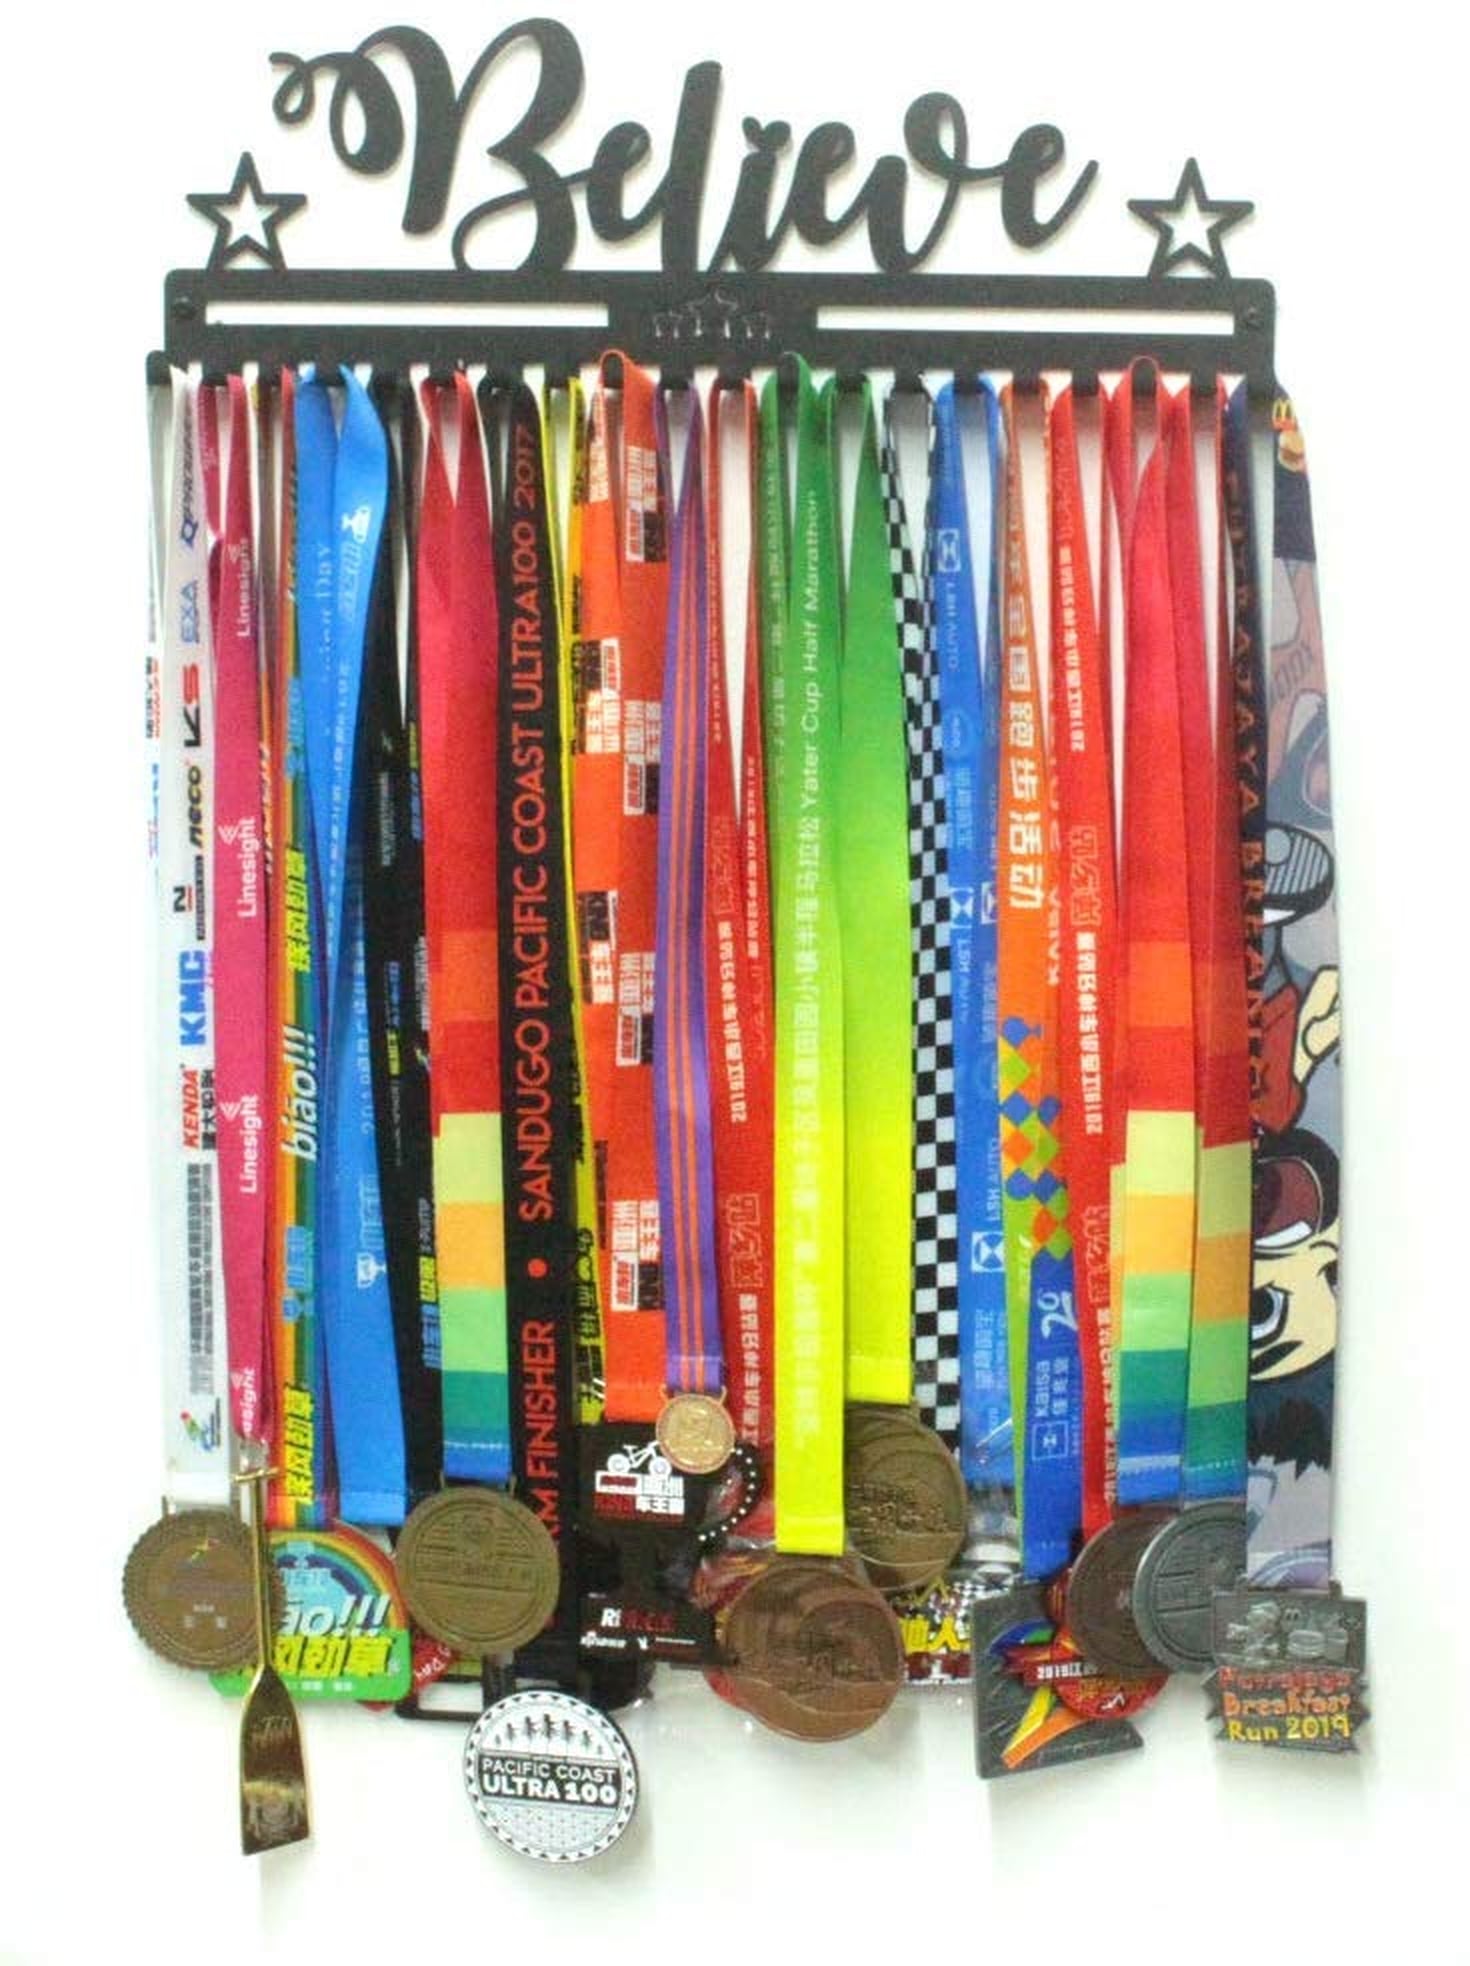 These Sleek Medal Racks Are Great Gifts For Runners | POPSUGAR Fitness